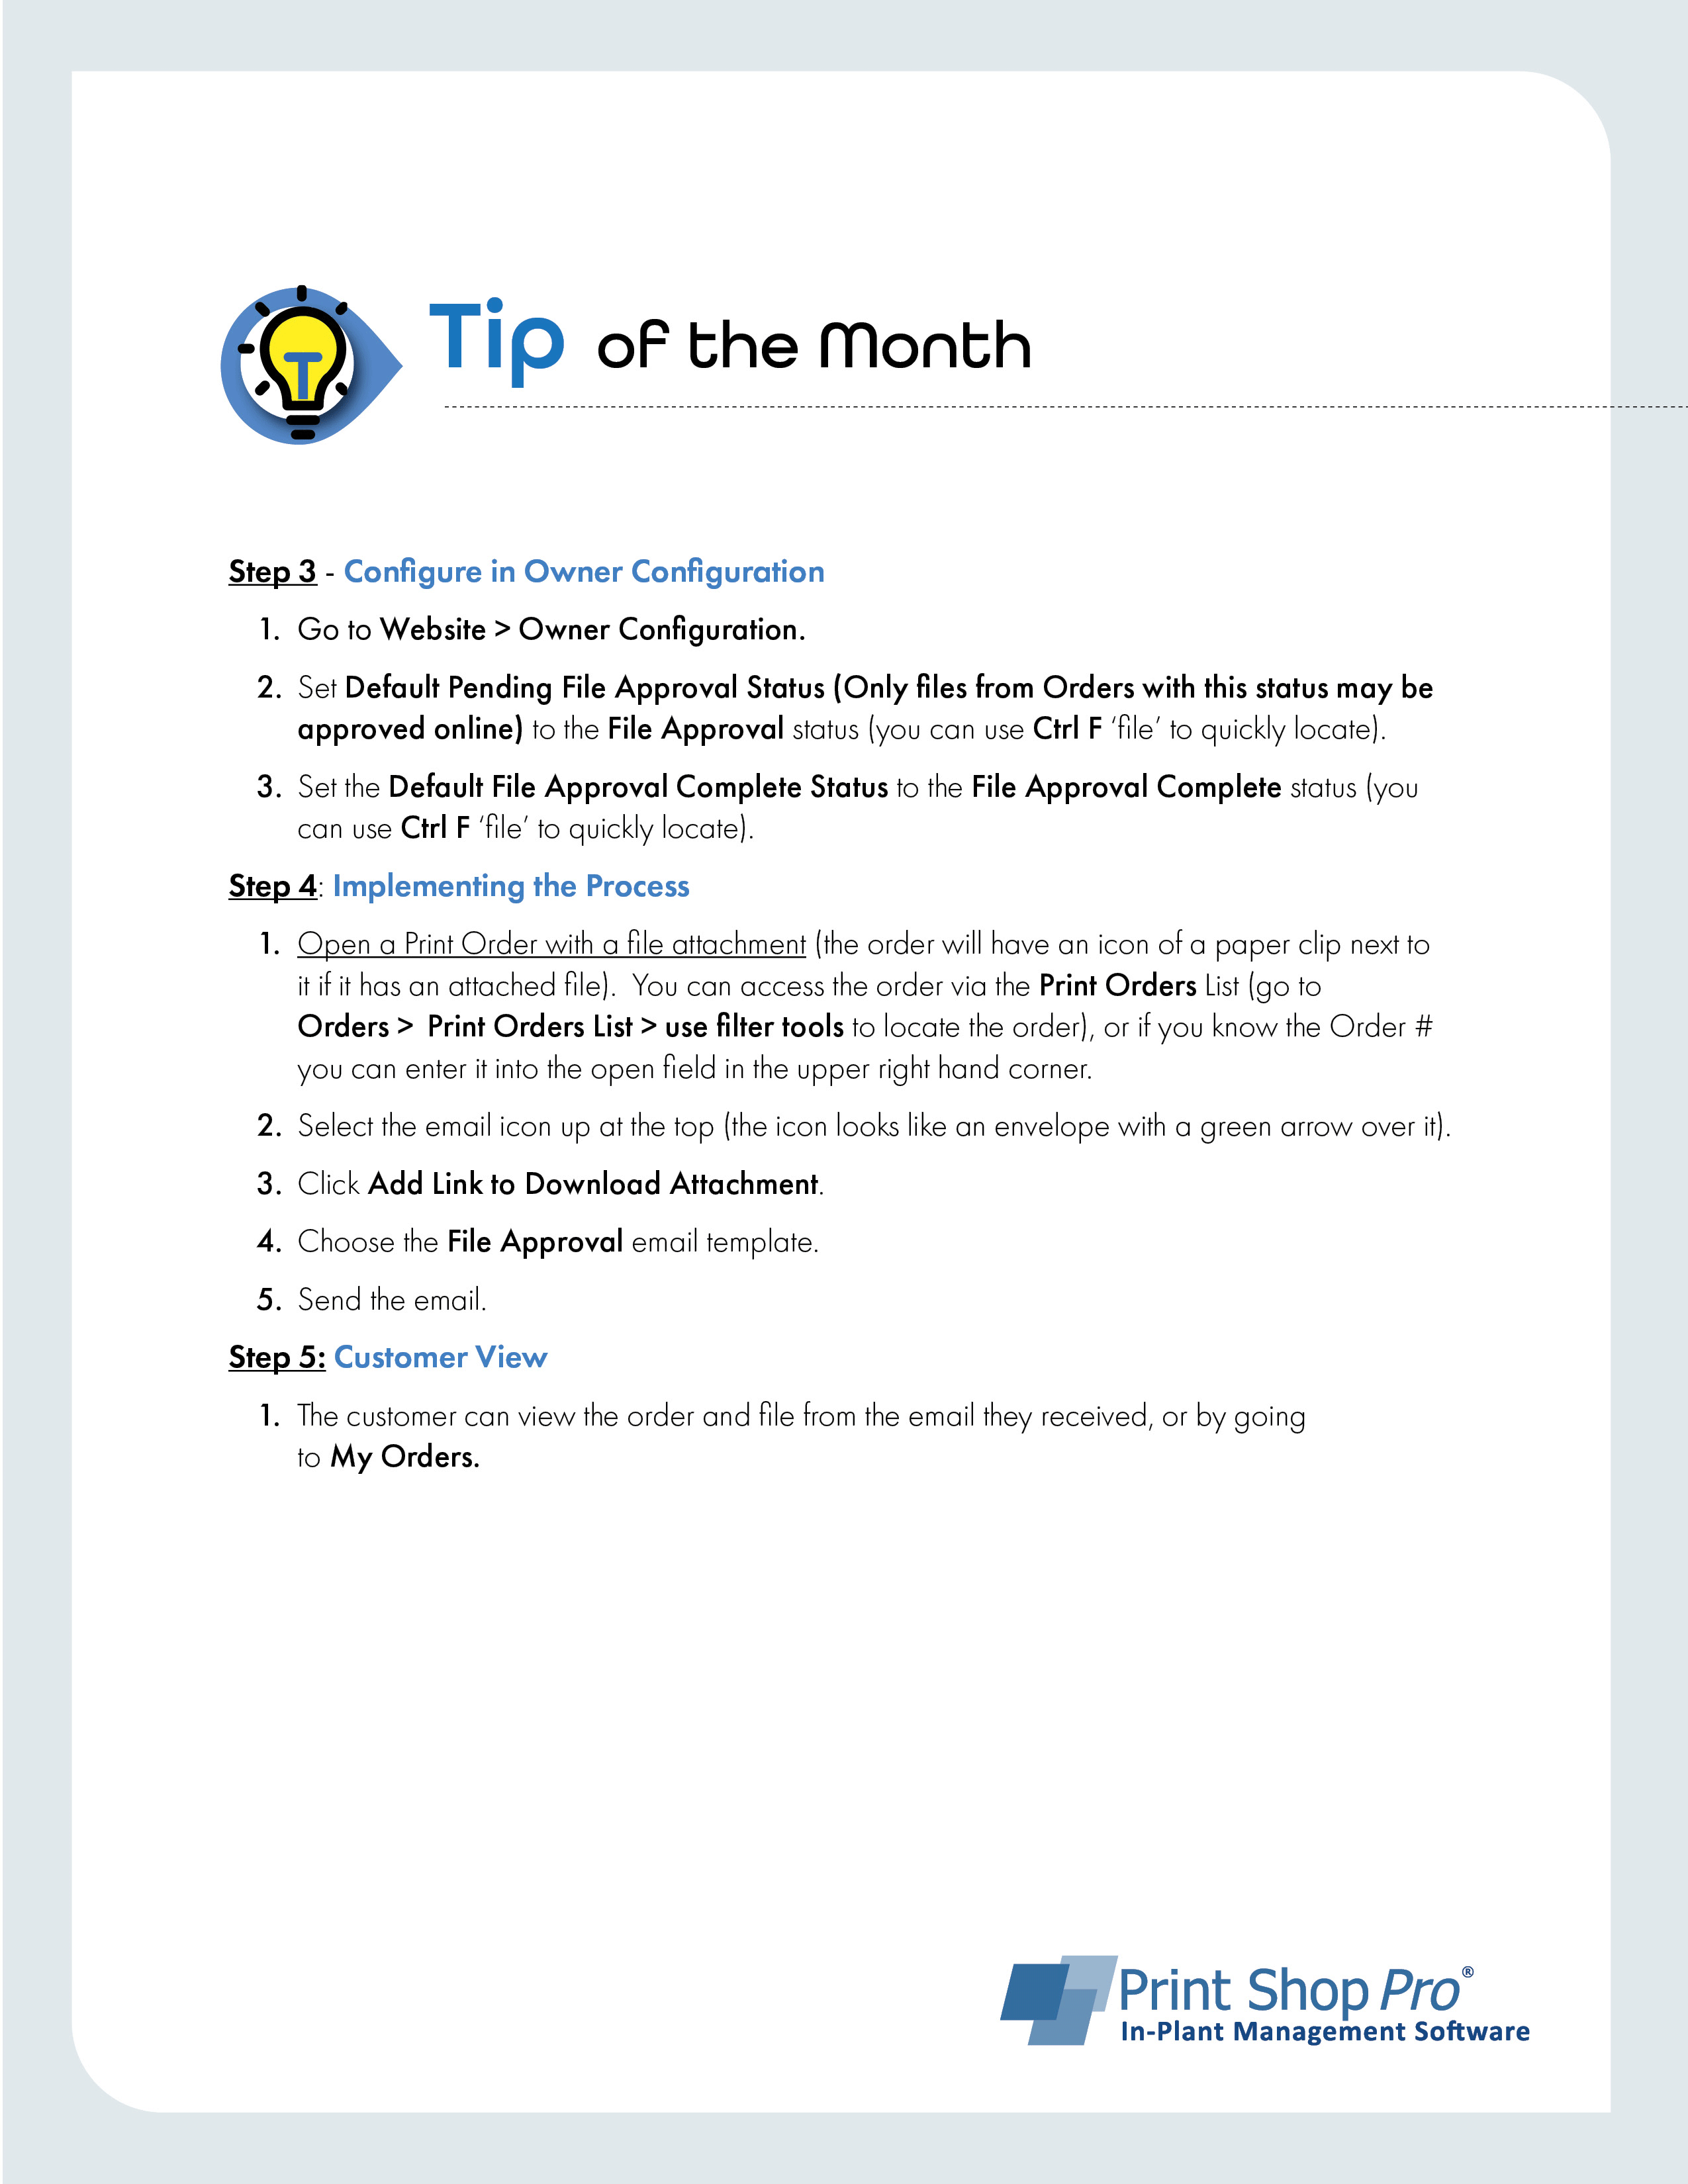 October Tip of the Month page 2